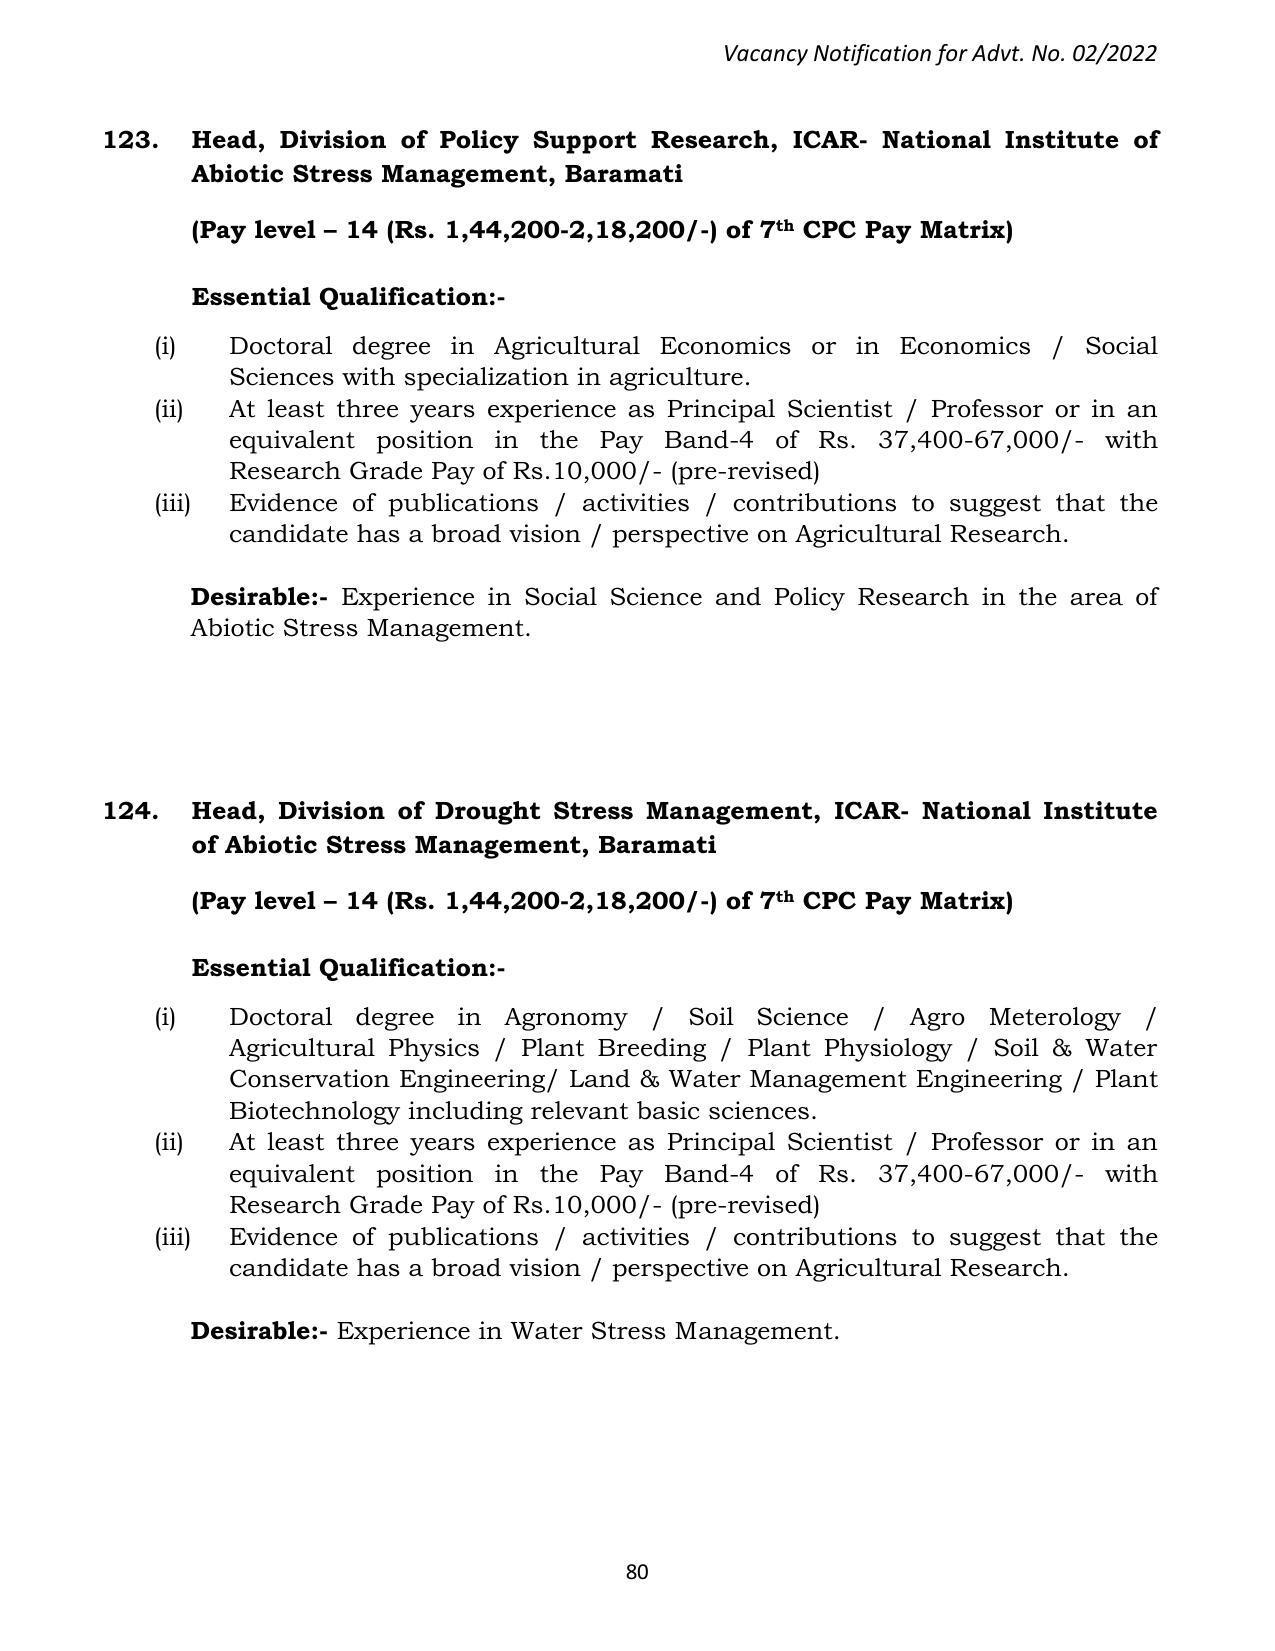 ASRB Non-Research Management Recruitment 2022 - Page 39